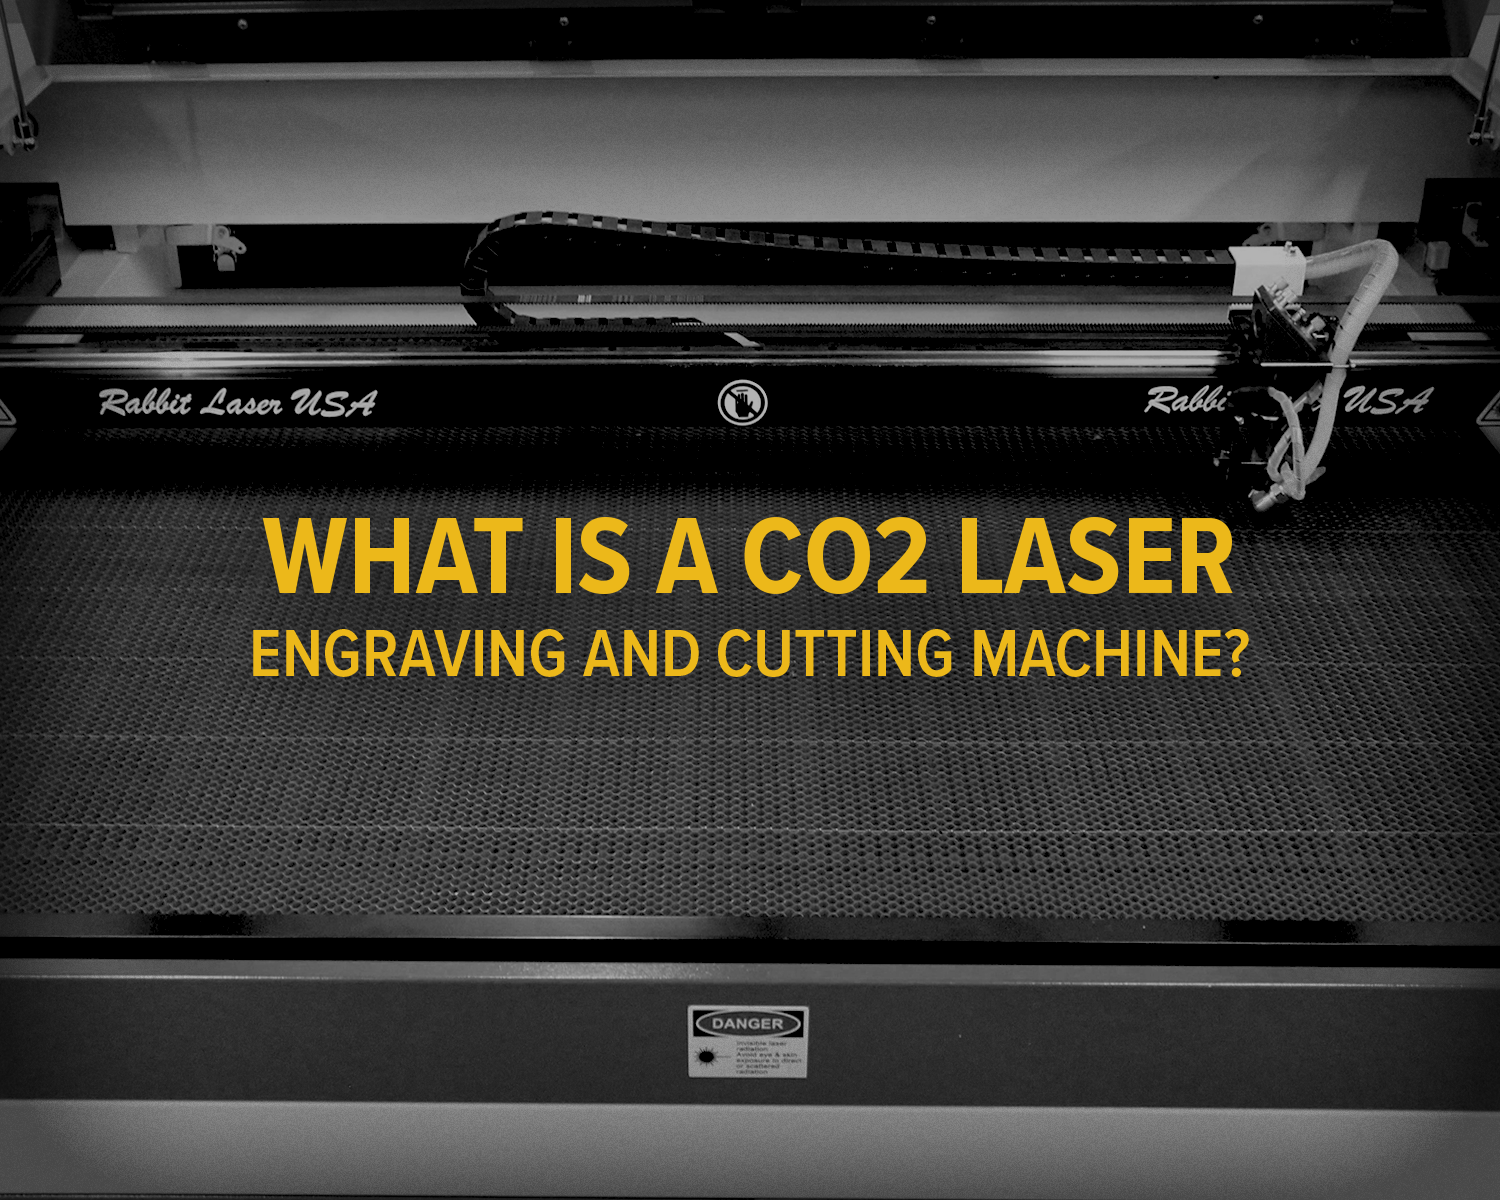 Title text over honey comb and gantry of co2 laser machine